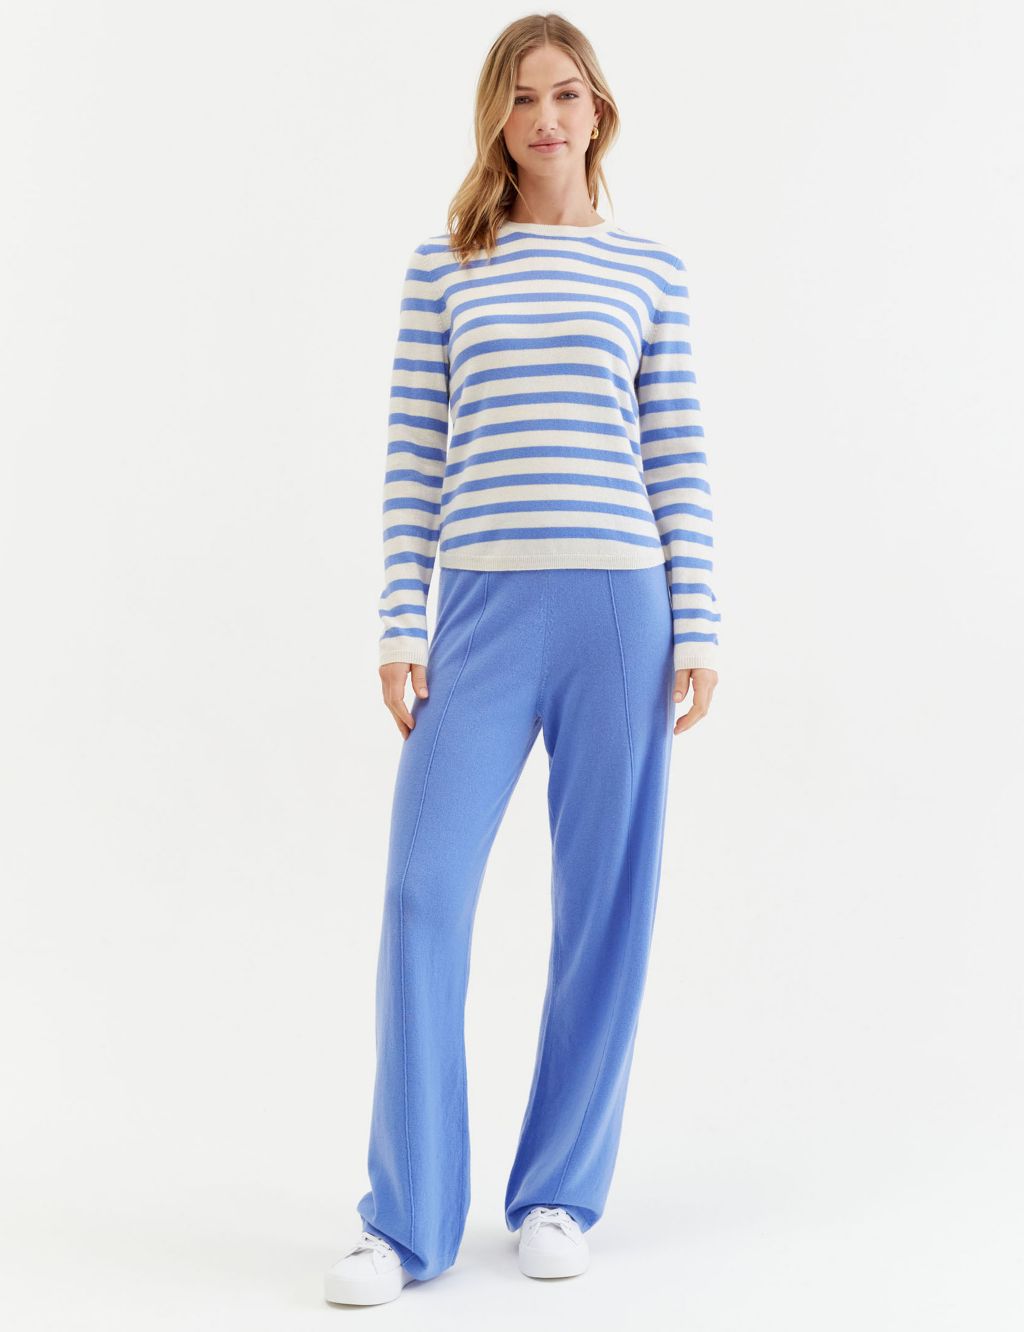 Wool Rich Striped Sweatshirt with Cashmere image 3